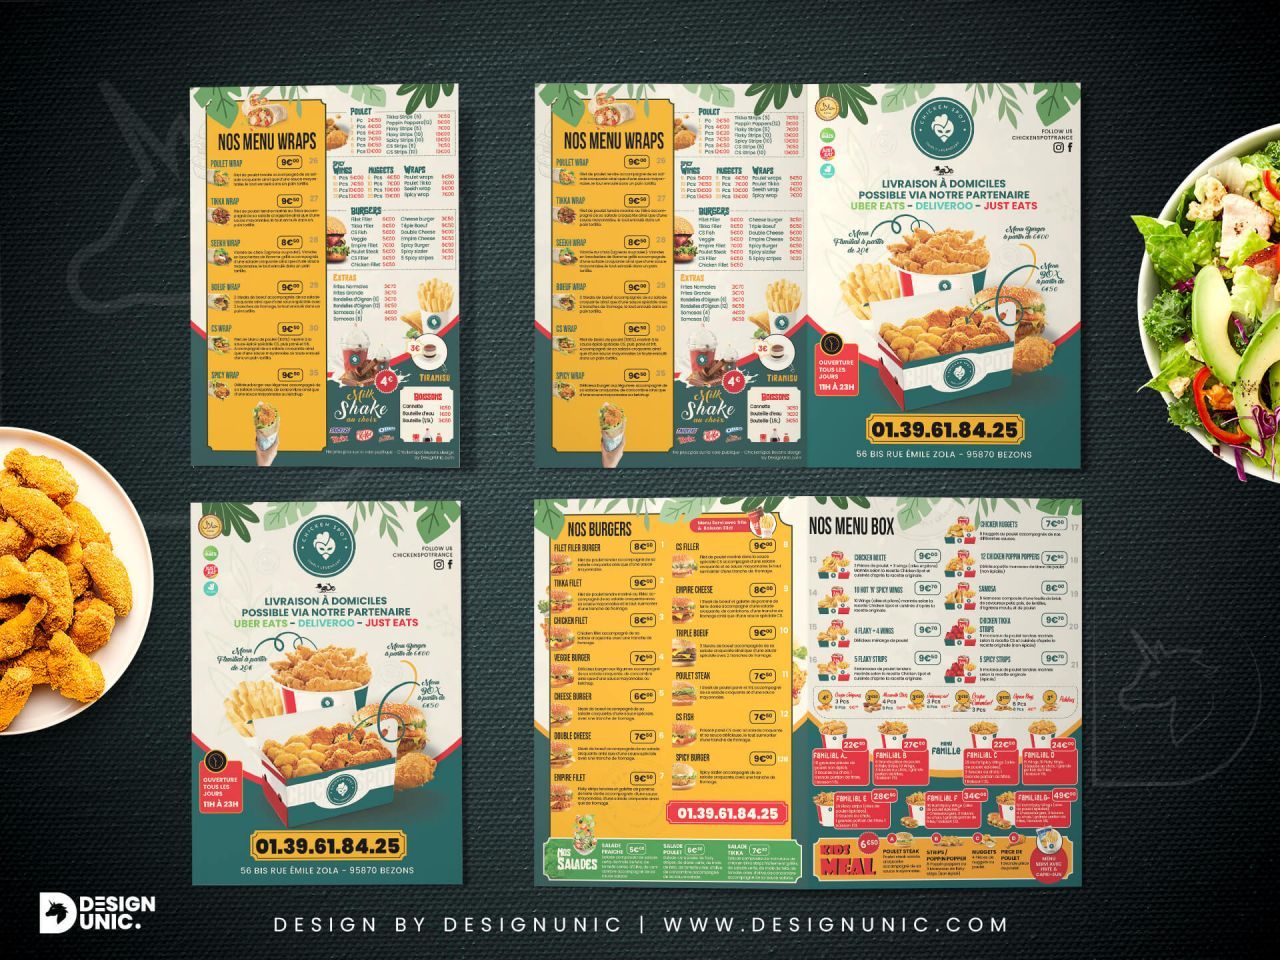 ChickenSpot+New+Green%3A+Branding%2C+Video+Animation+and+Flyer%21